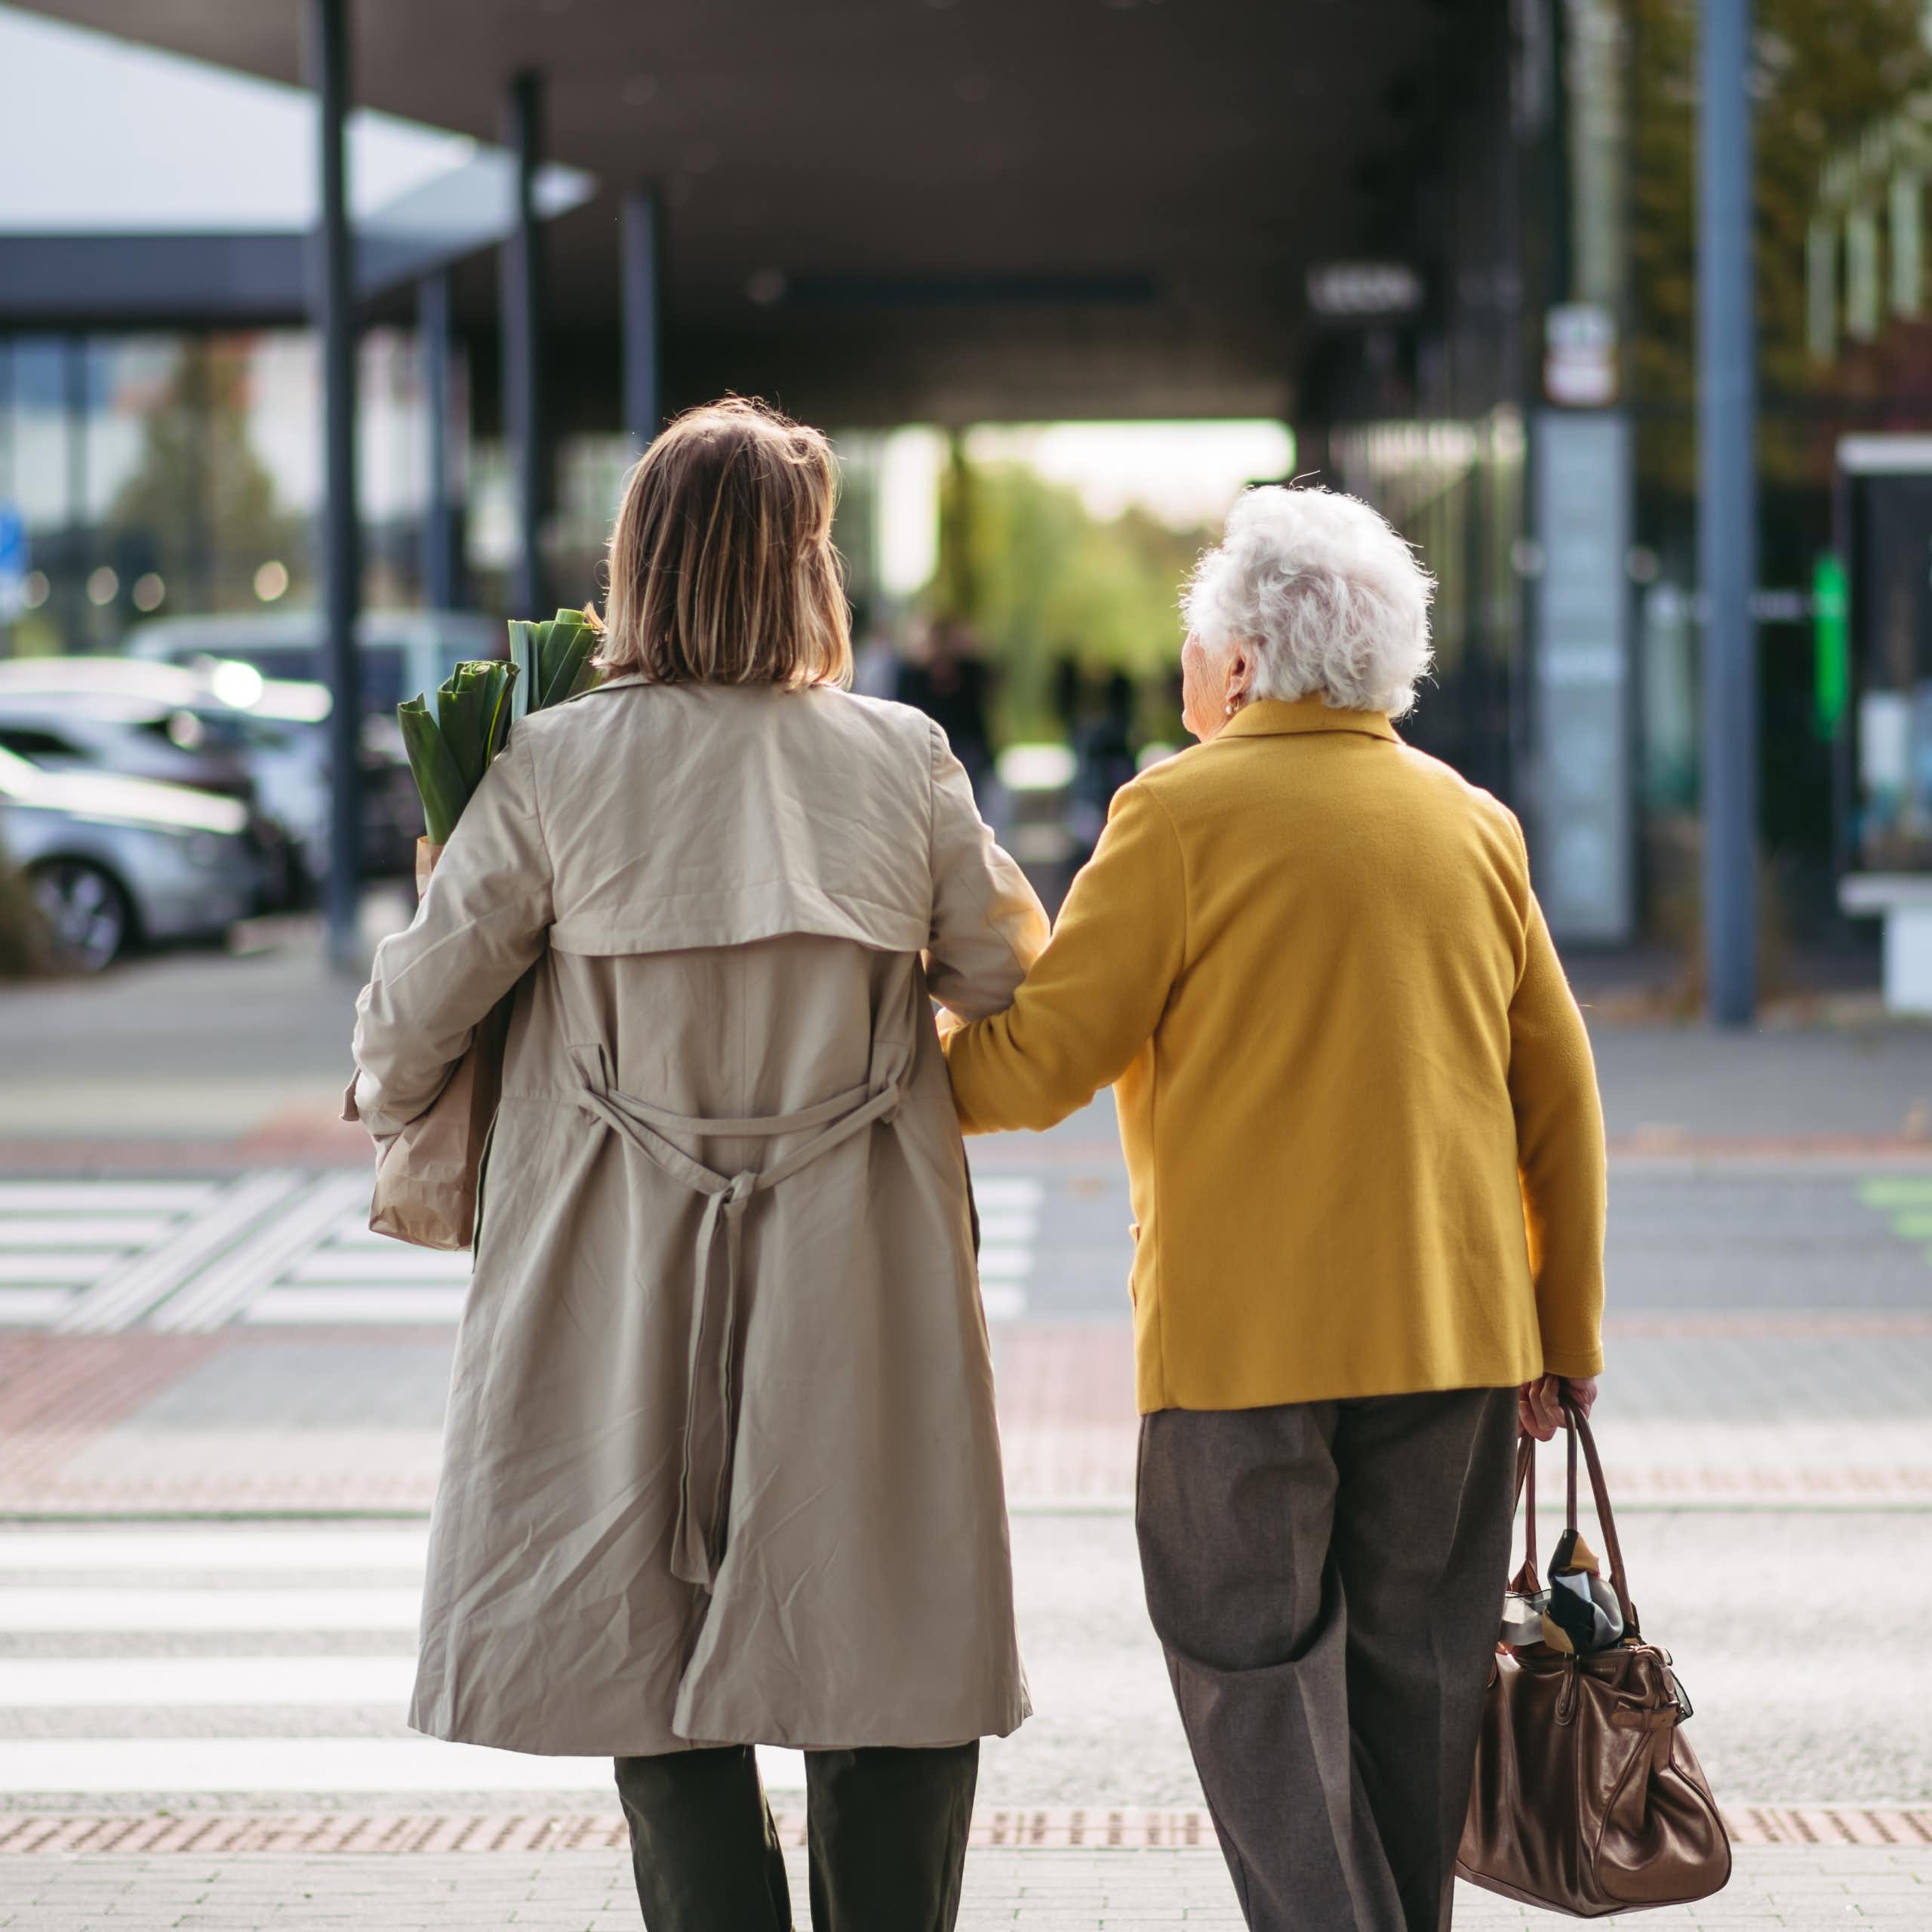 A young and older woman seen from behind walking across a street holding hands